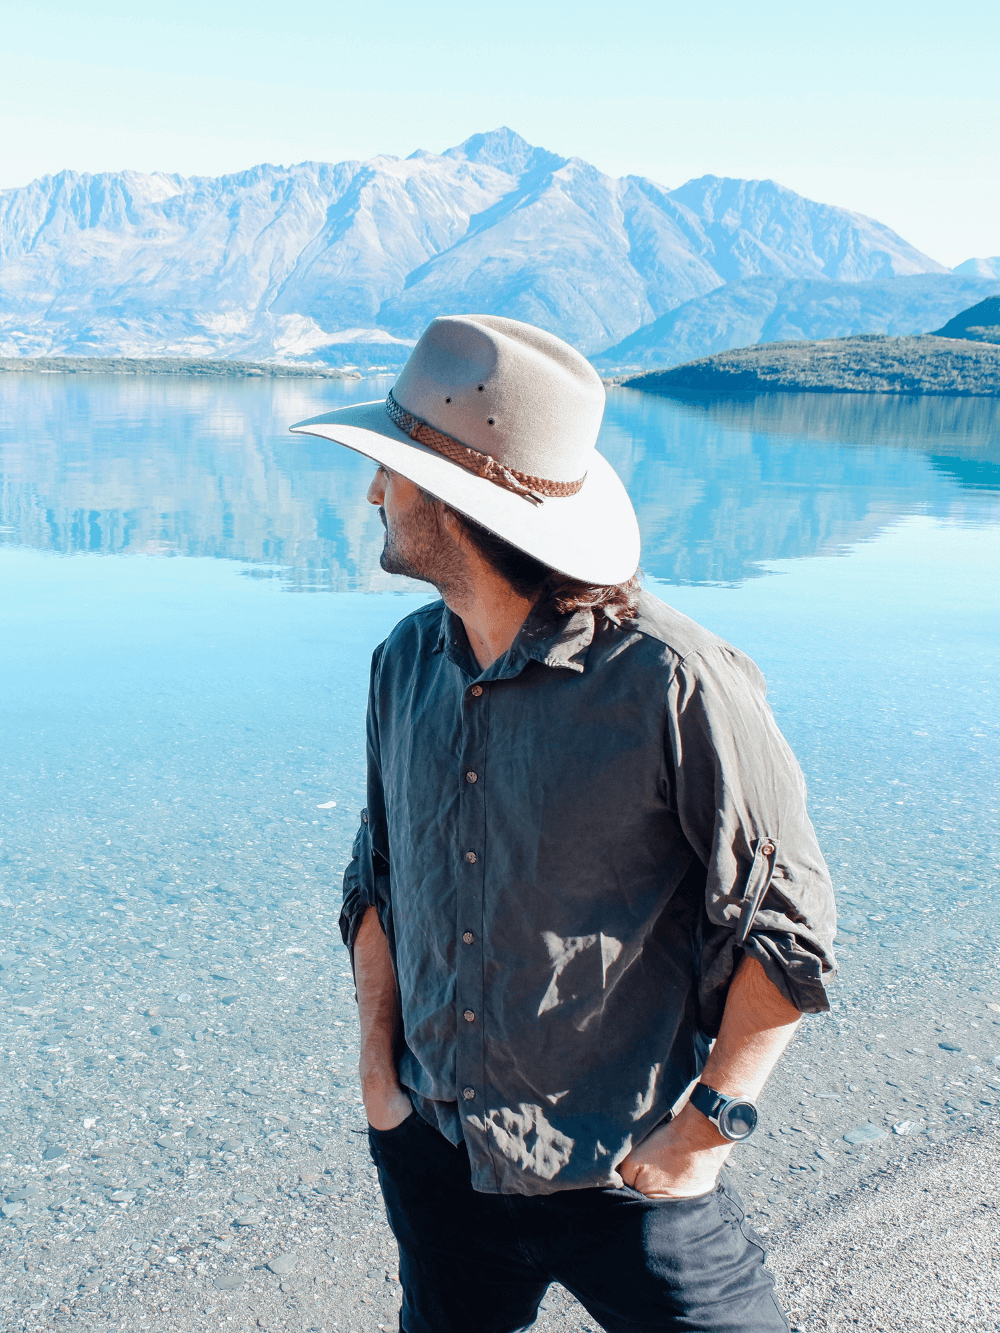 Man wearing Akubra hat staring our across a lake with mountains in the background.